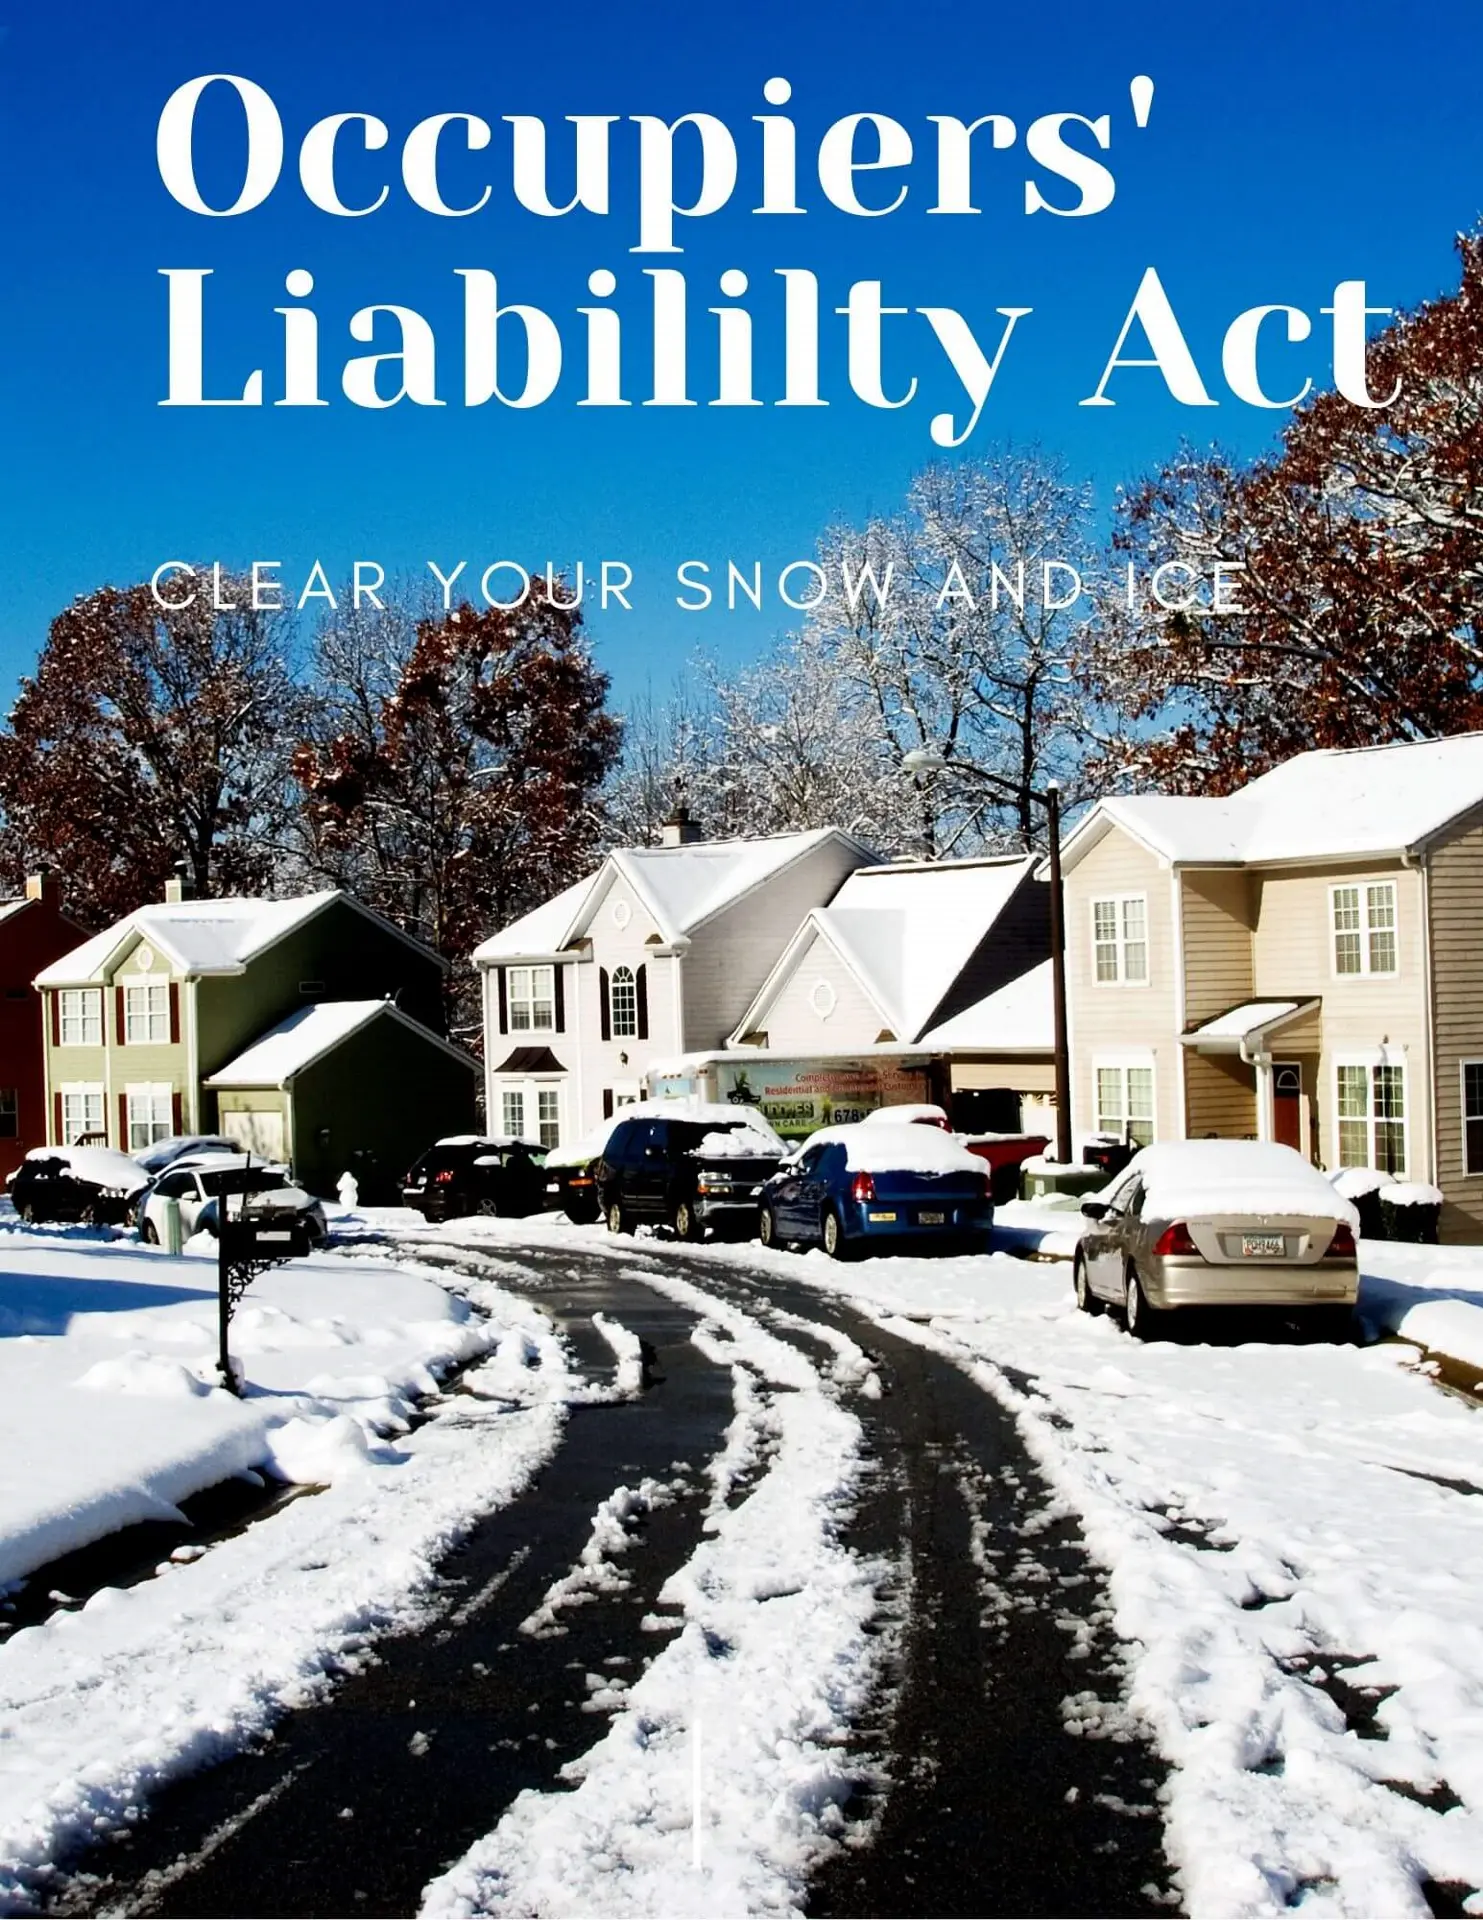 Occupiers Liability. Clear Your Snow And Ice.